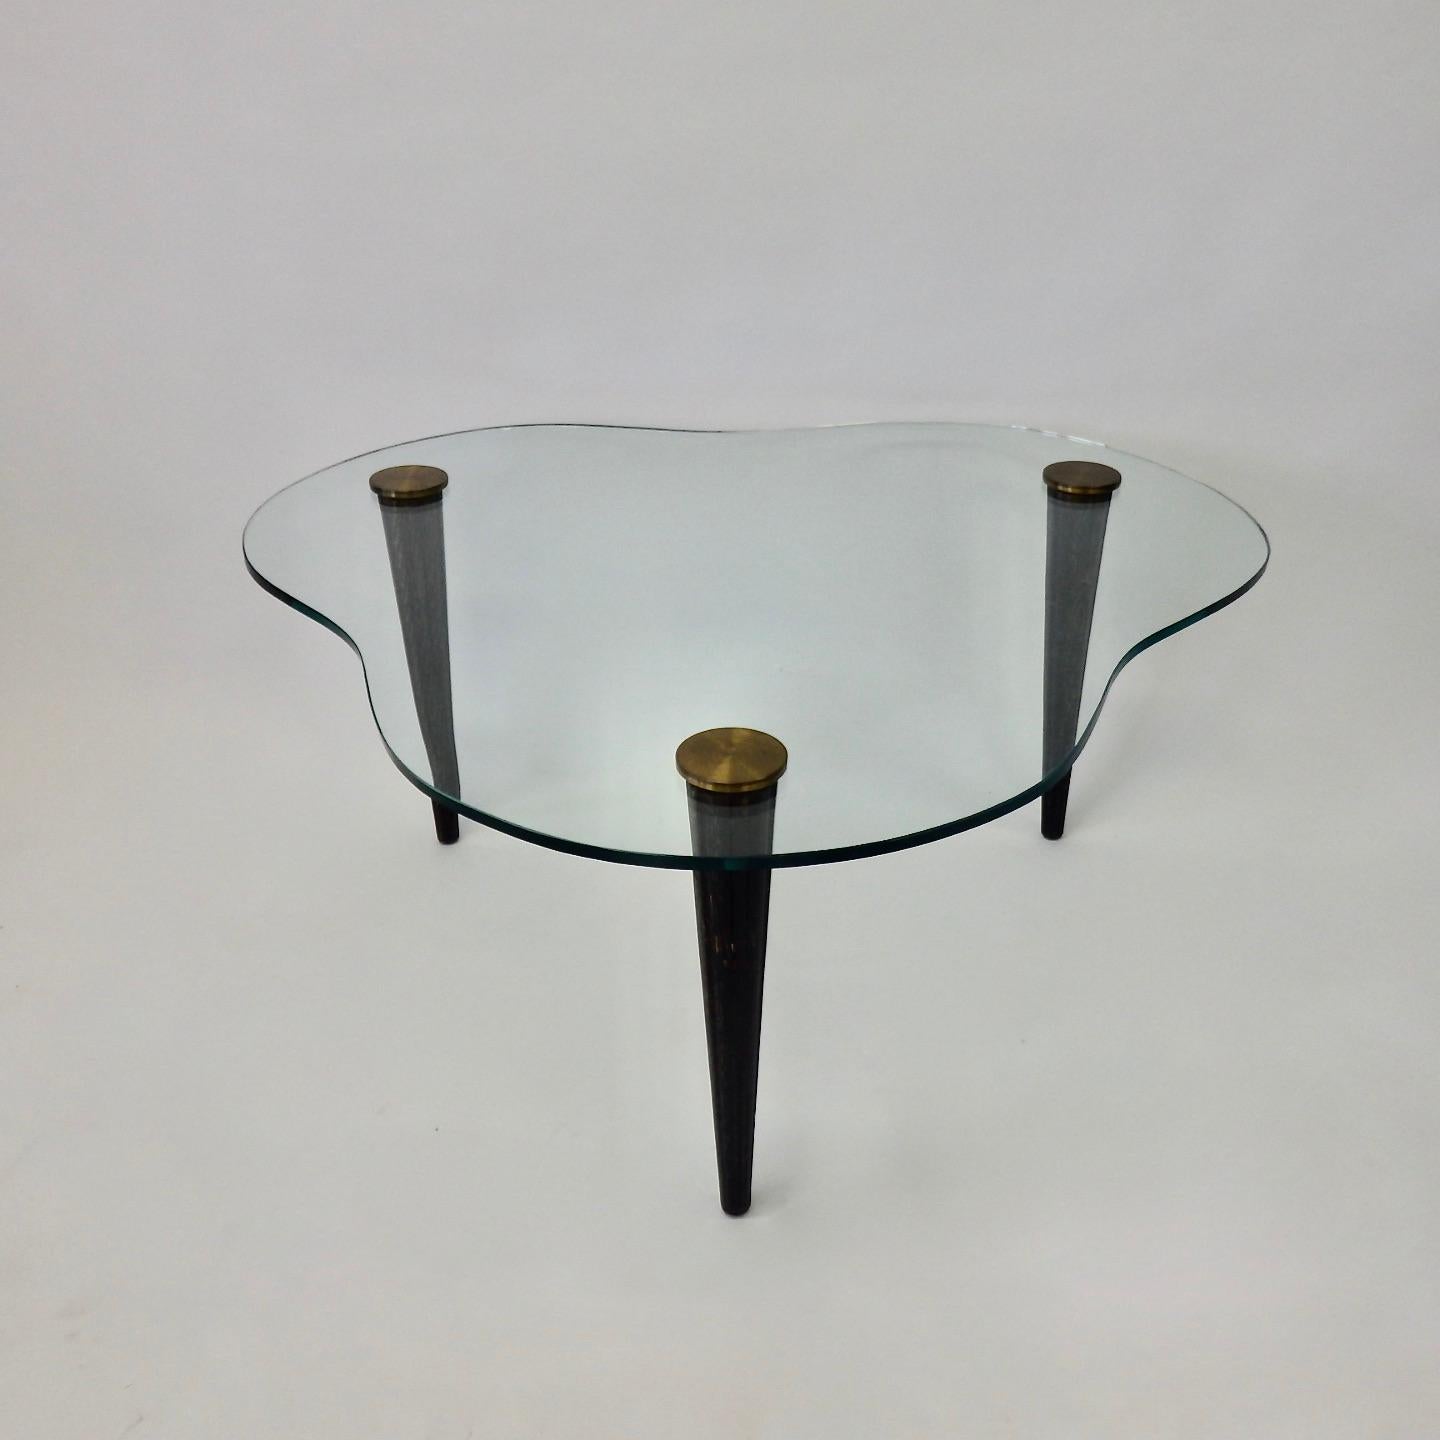 Three fluted ceruse finish legs support biomorphic shape glass top table. By Modernage in the style of Gilbert Rohdes cloud tables.